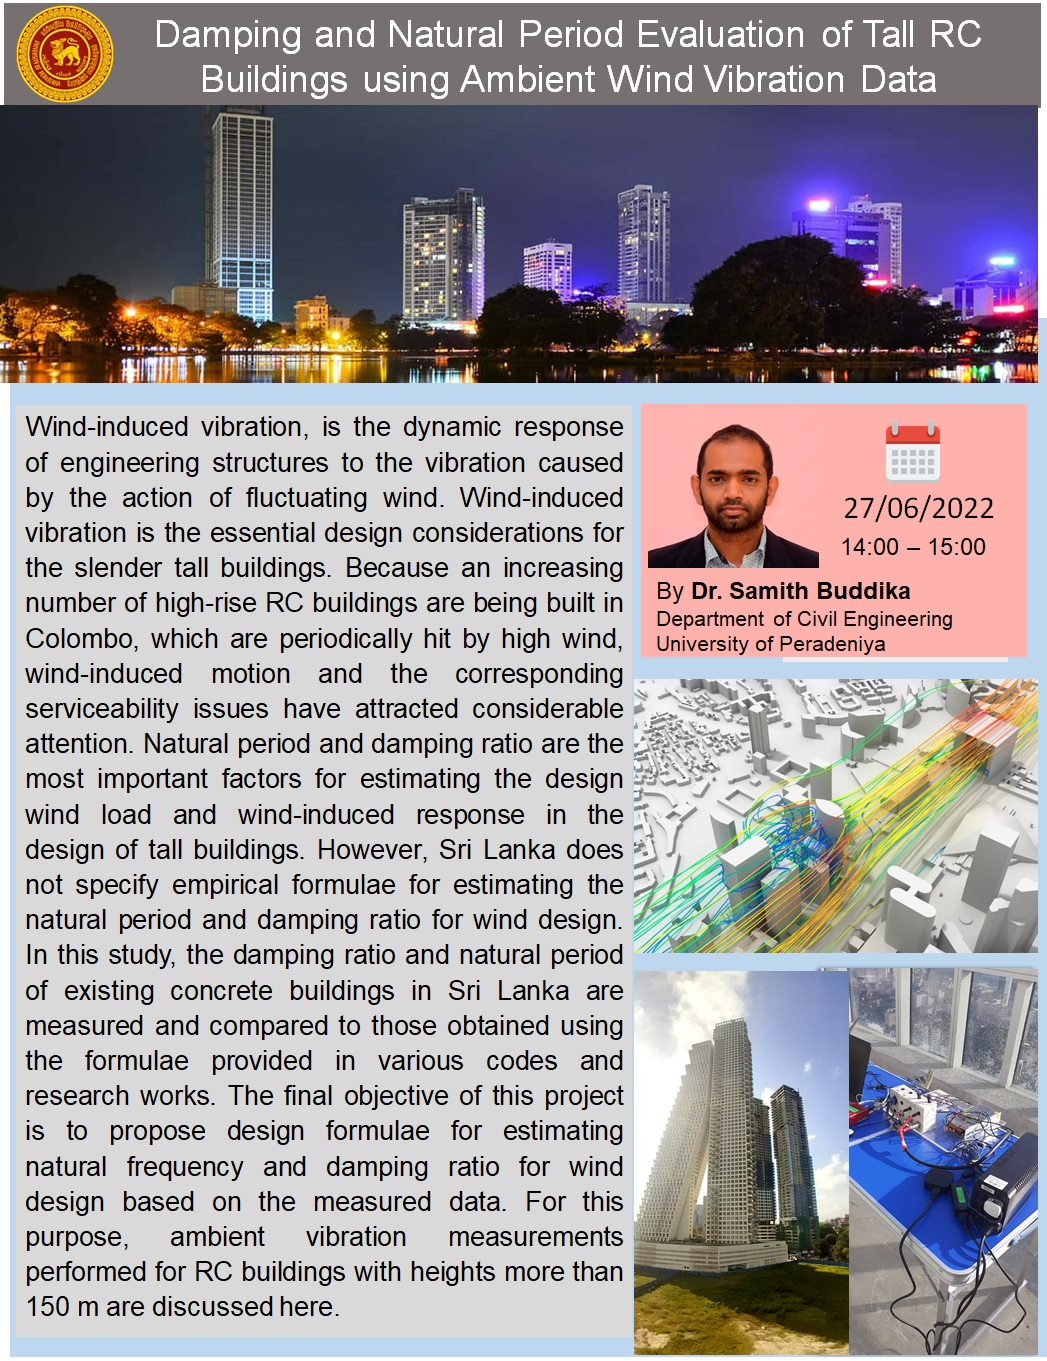 Damping and Natural Period Evaluation of Tall RC Buildings using Ambient Wind Vibration Data